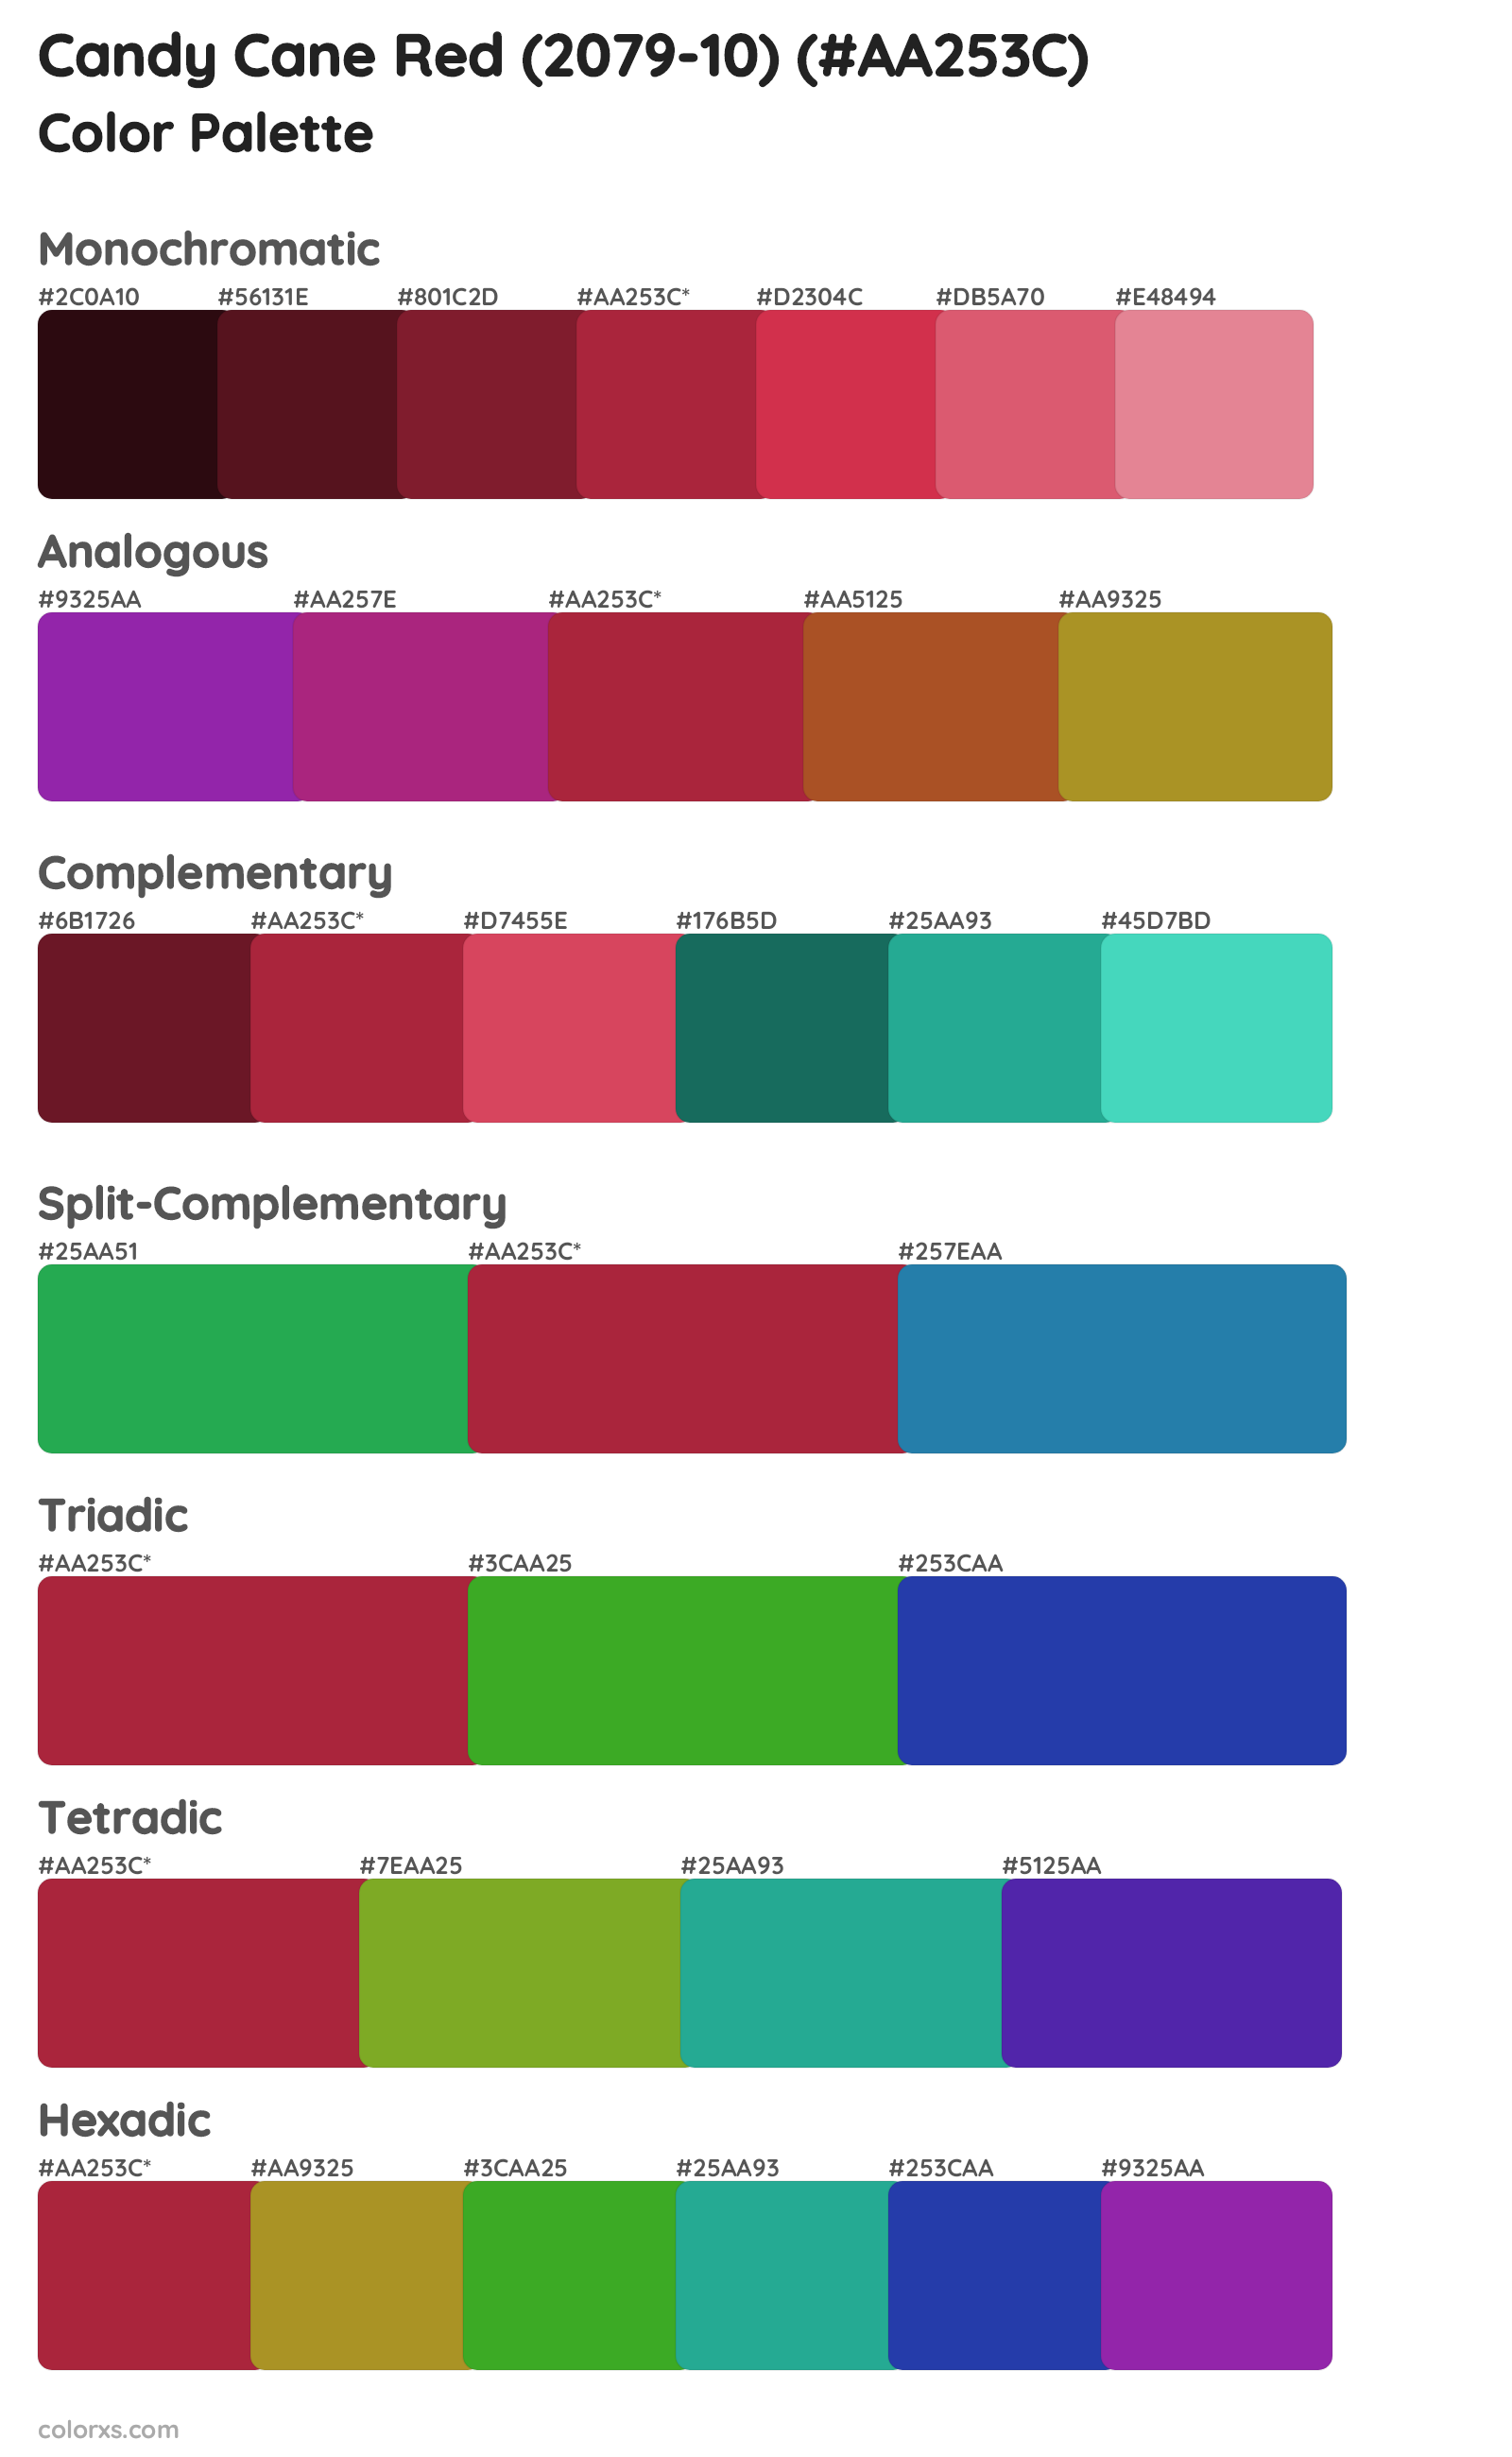 Candy Cane Red (2079-10) Color Scheme Palettes